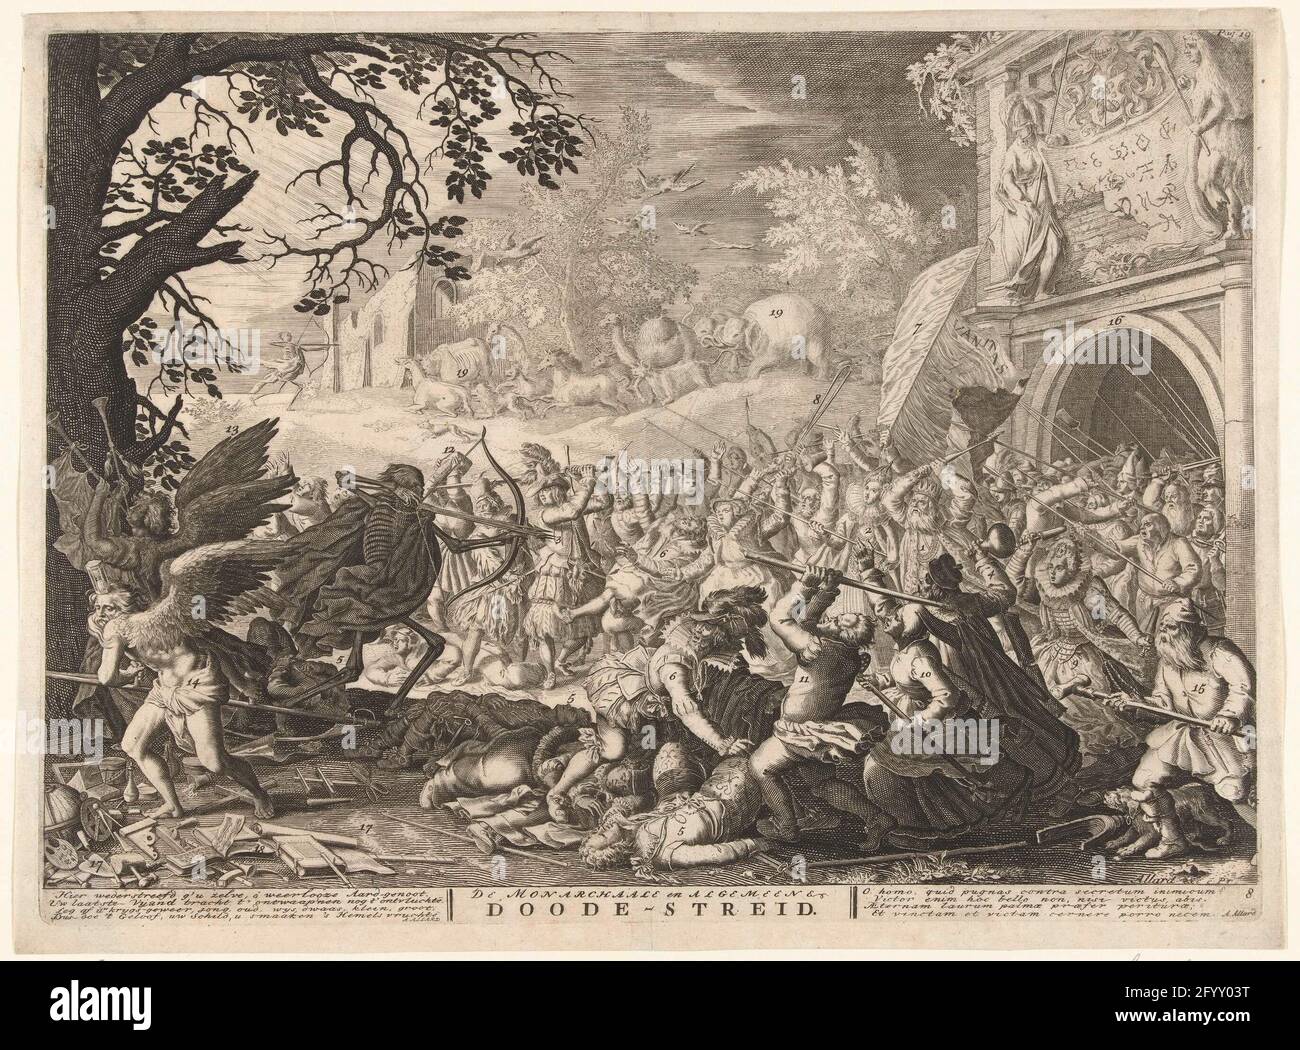 Death is fighting humanity; The monarchical and general dead streid. Allegorical show. Death shoots his arrow on an armed crowd of young and old, poor and rich men and women coming from a gate. They try to defend themselves against the arrows of death. With his science, the father takes out instruments of science such as globe and passer but also objects related to the arts. Fame can be dismissed by death. In the background, death shoots his arrows on elephants and other animals. Below the show is a Dutch and Latin verse about this fight in and at death. Stock Photo